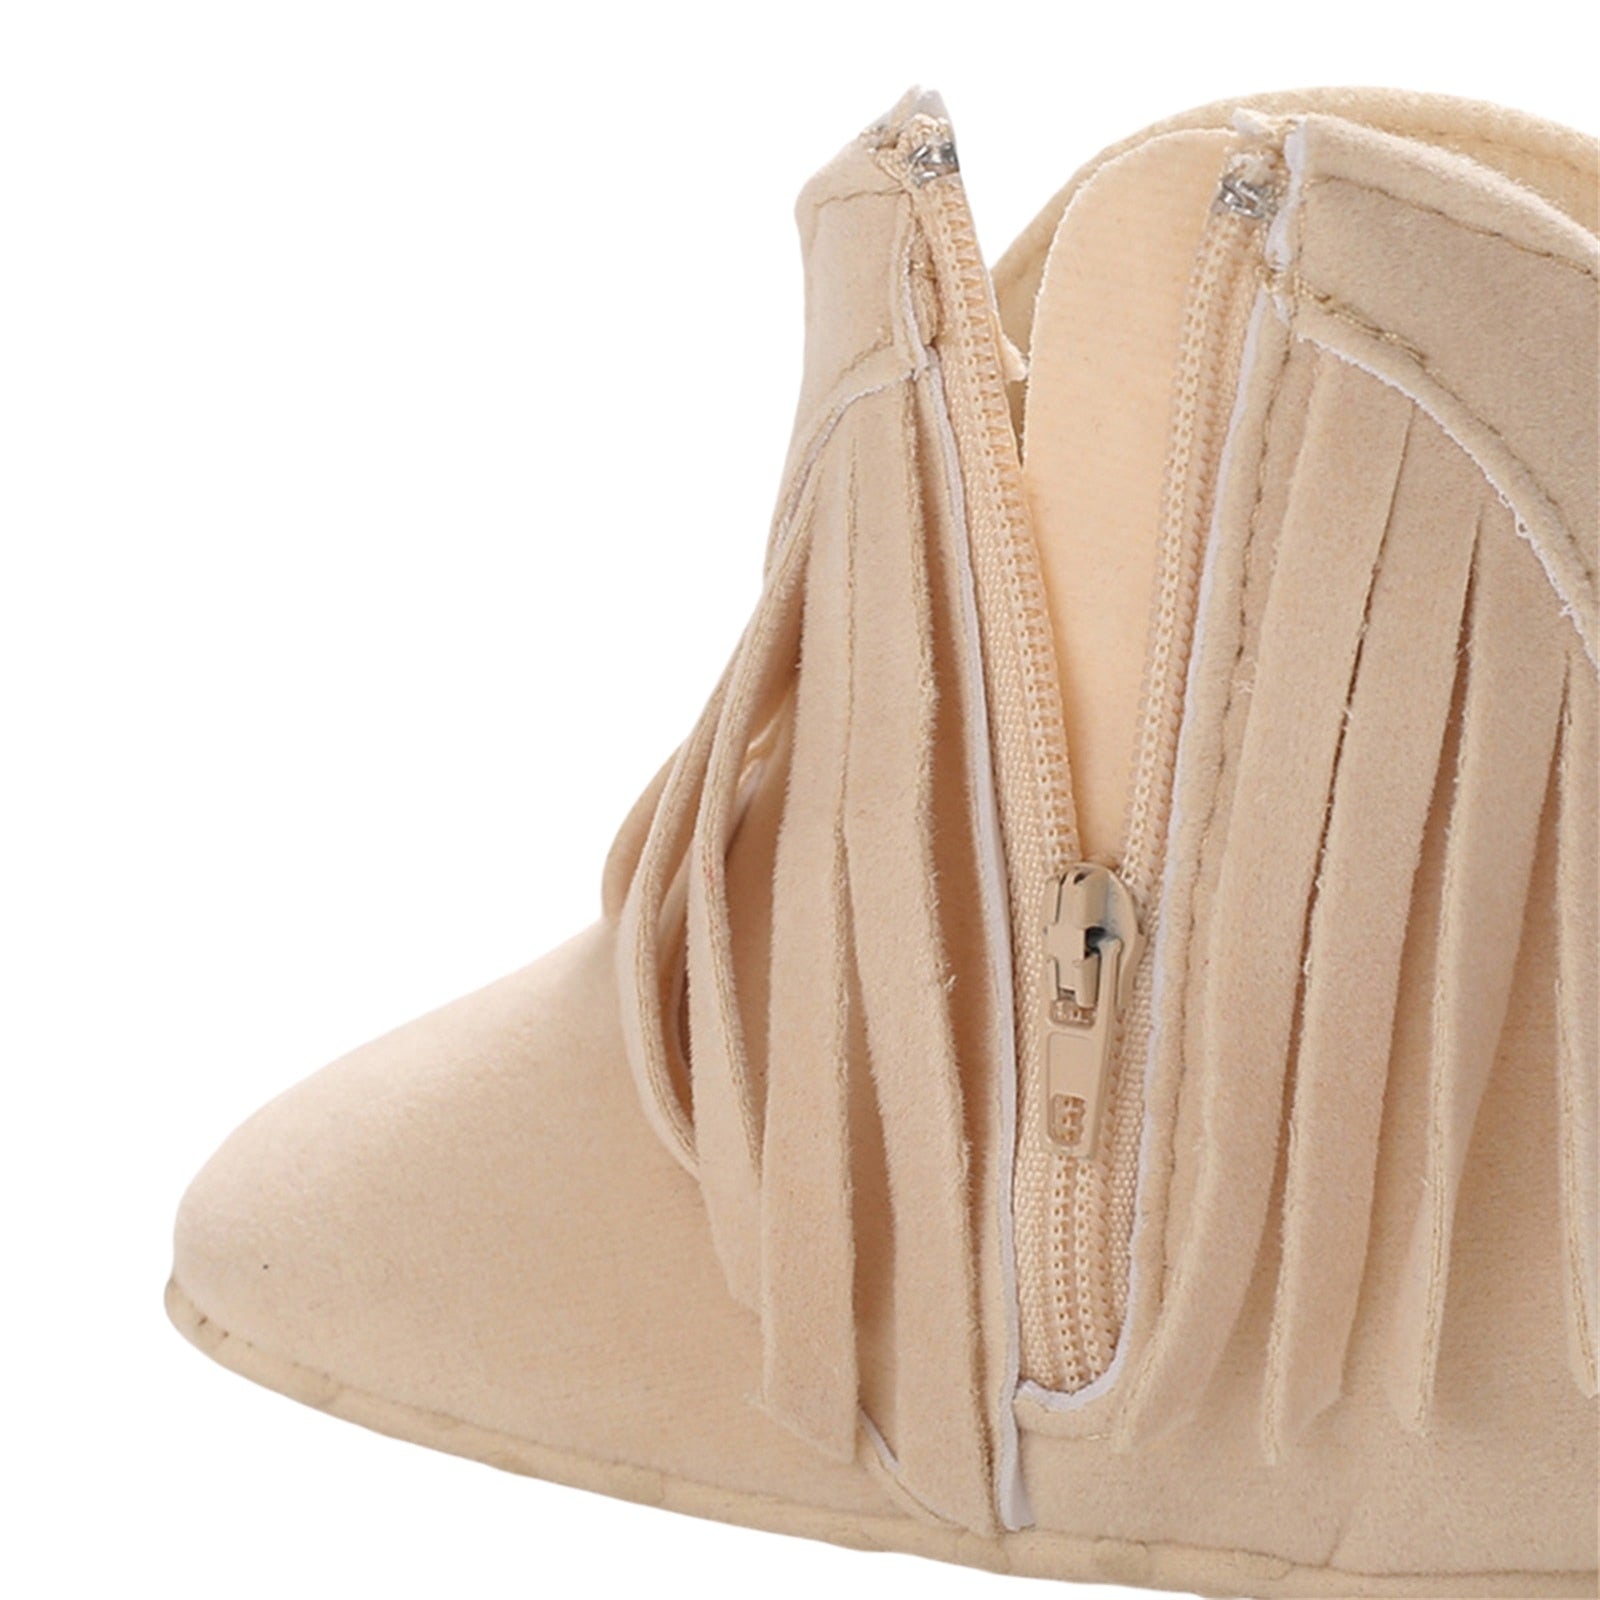 Baby Boots - Baby Girls Tassel Boots